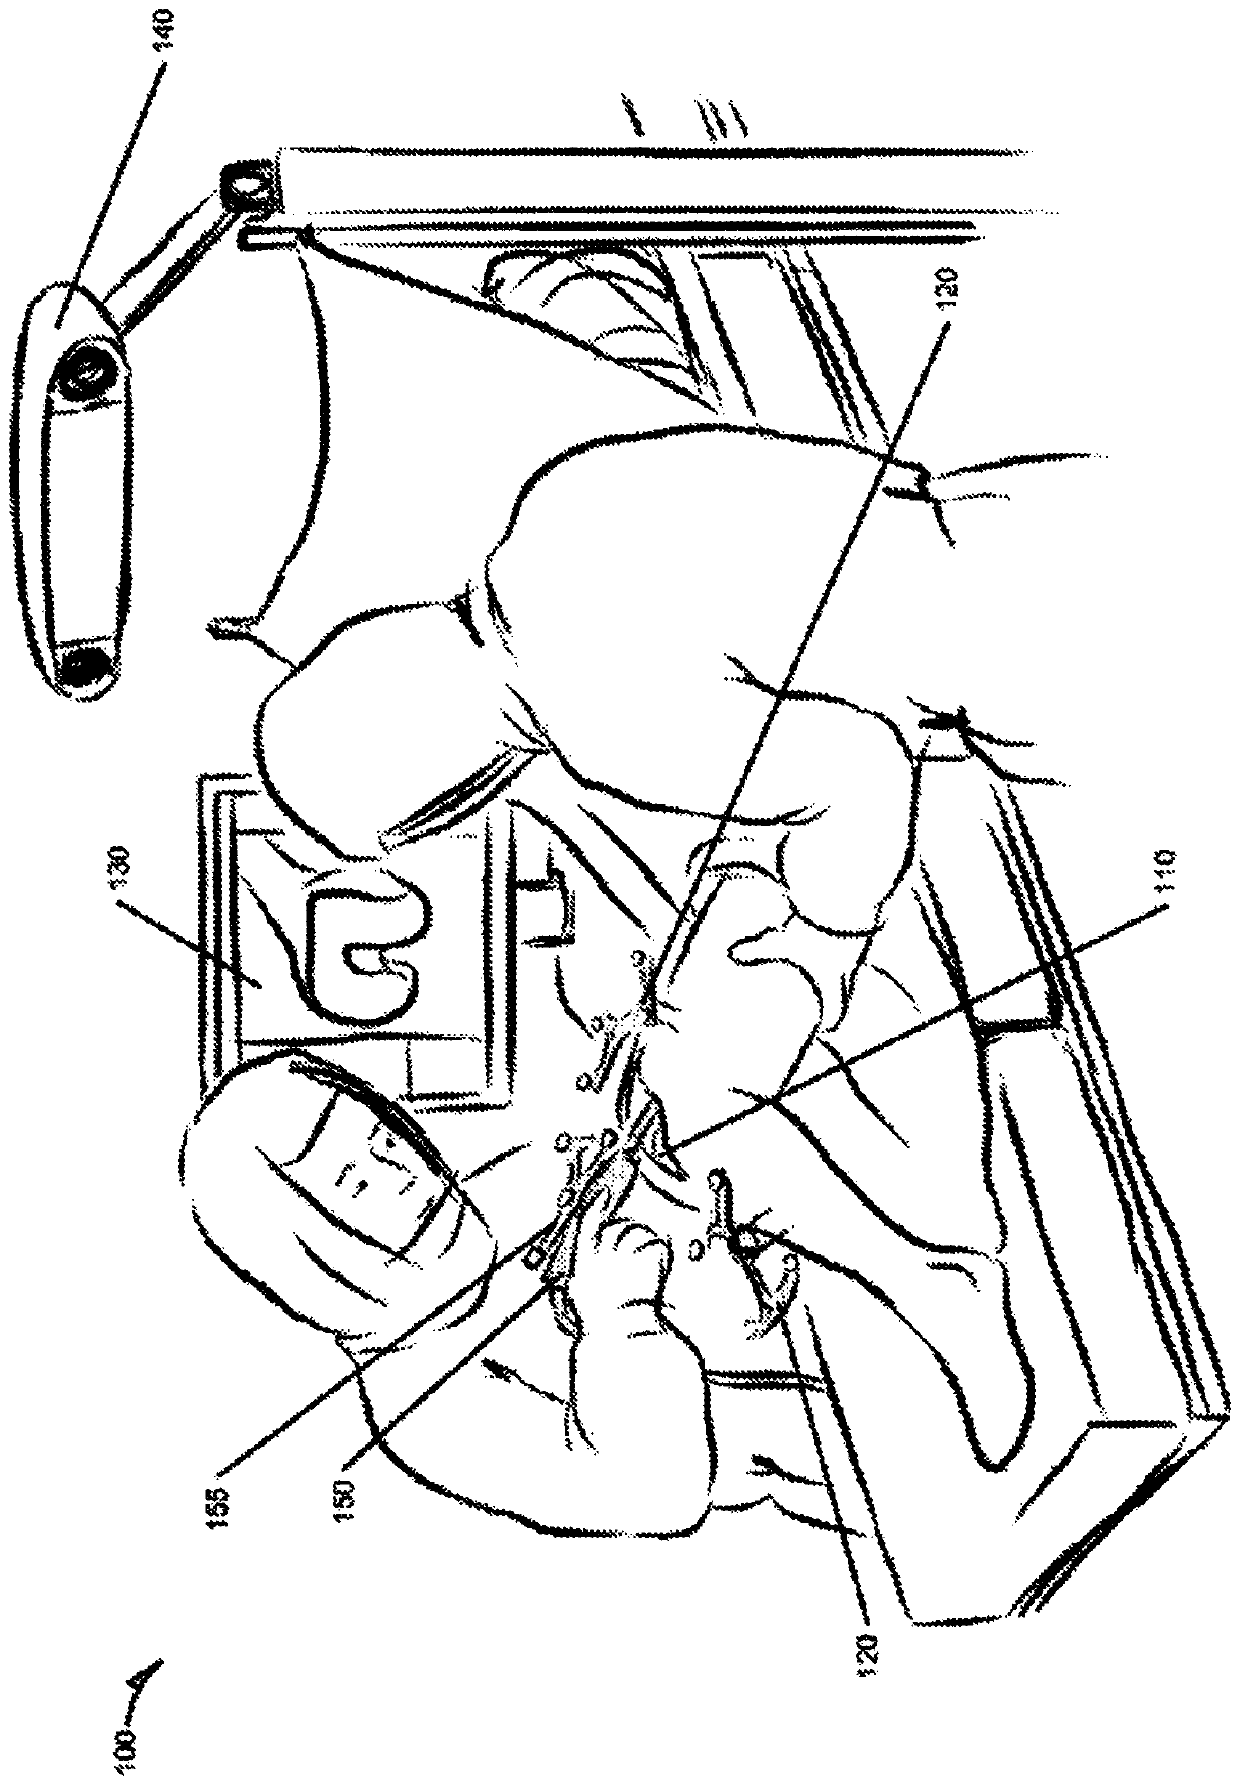 Surgical punch tool for robotically assisted bone preparation for positioning of a cutting block